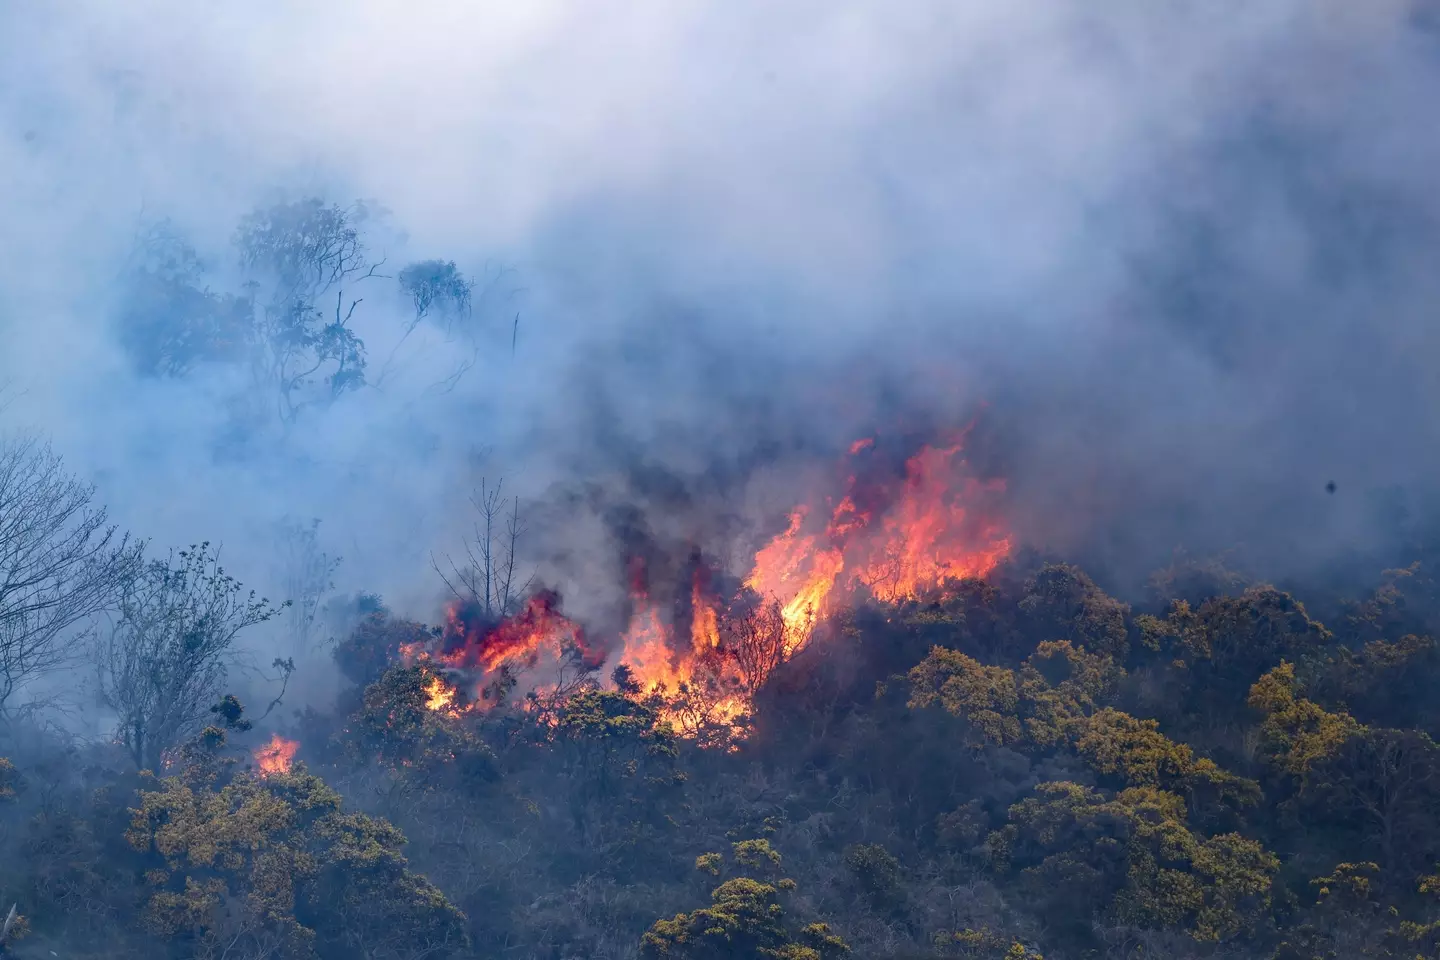 The risk of a wildfire has been raised to 'very high'.